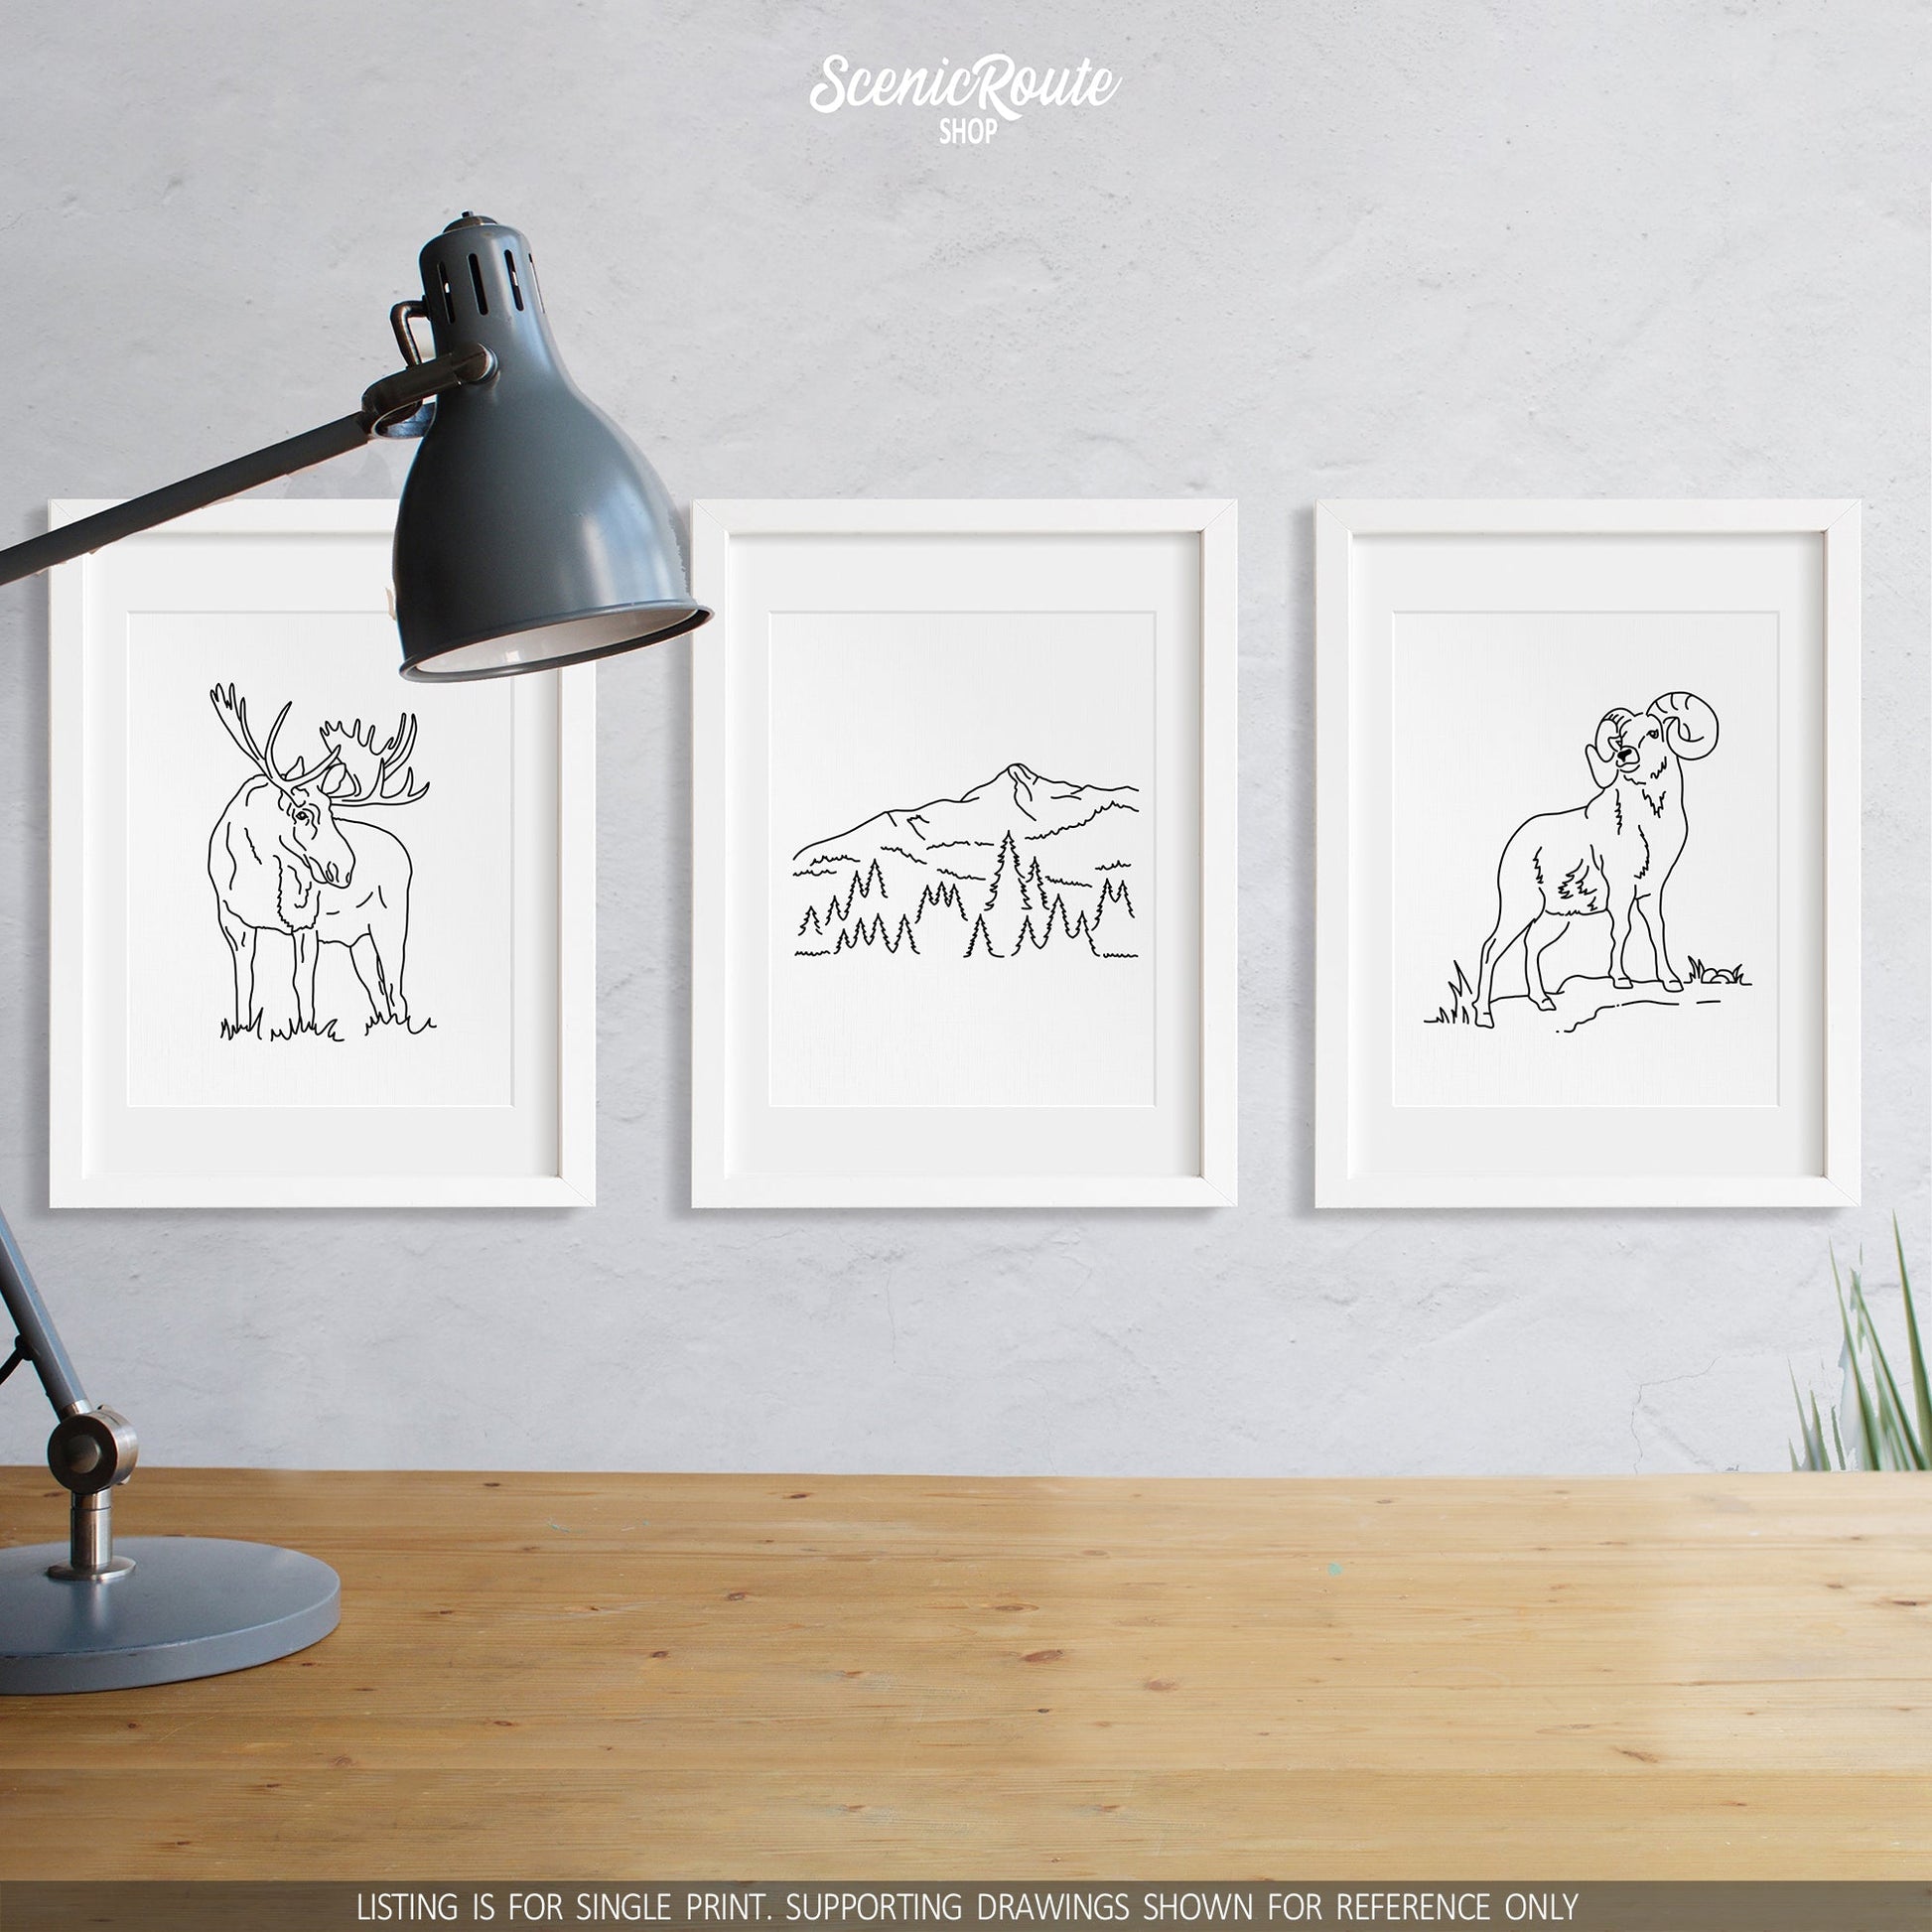 A group of three framed drawings on a wall above a desk with a lamp. The line art drawings include a Moose, Big Sky Montana, and a Longhorn Sheep